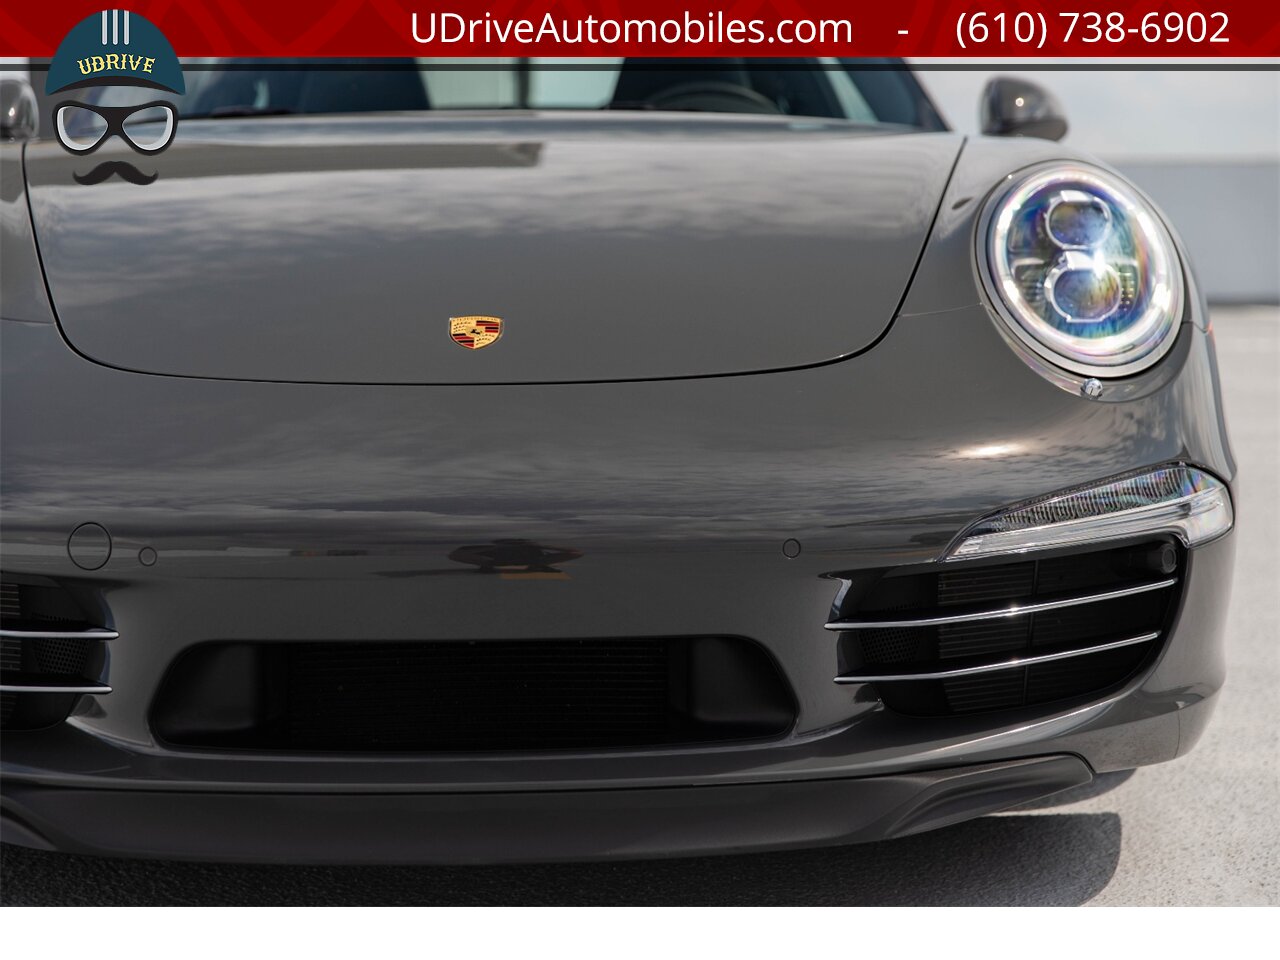 2014 Porsche 911 Carrera S 50th Anniversary Edition Certified  CPO Warranty thru 12/26/21 Full Front End Clear Film - Photo 10 - West Chester, PA 19382